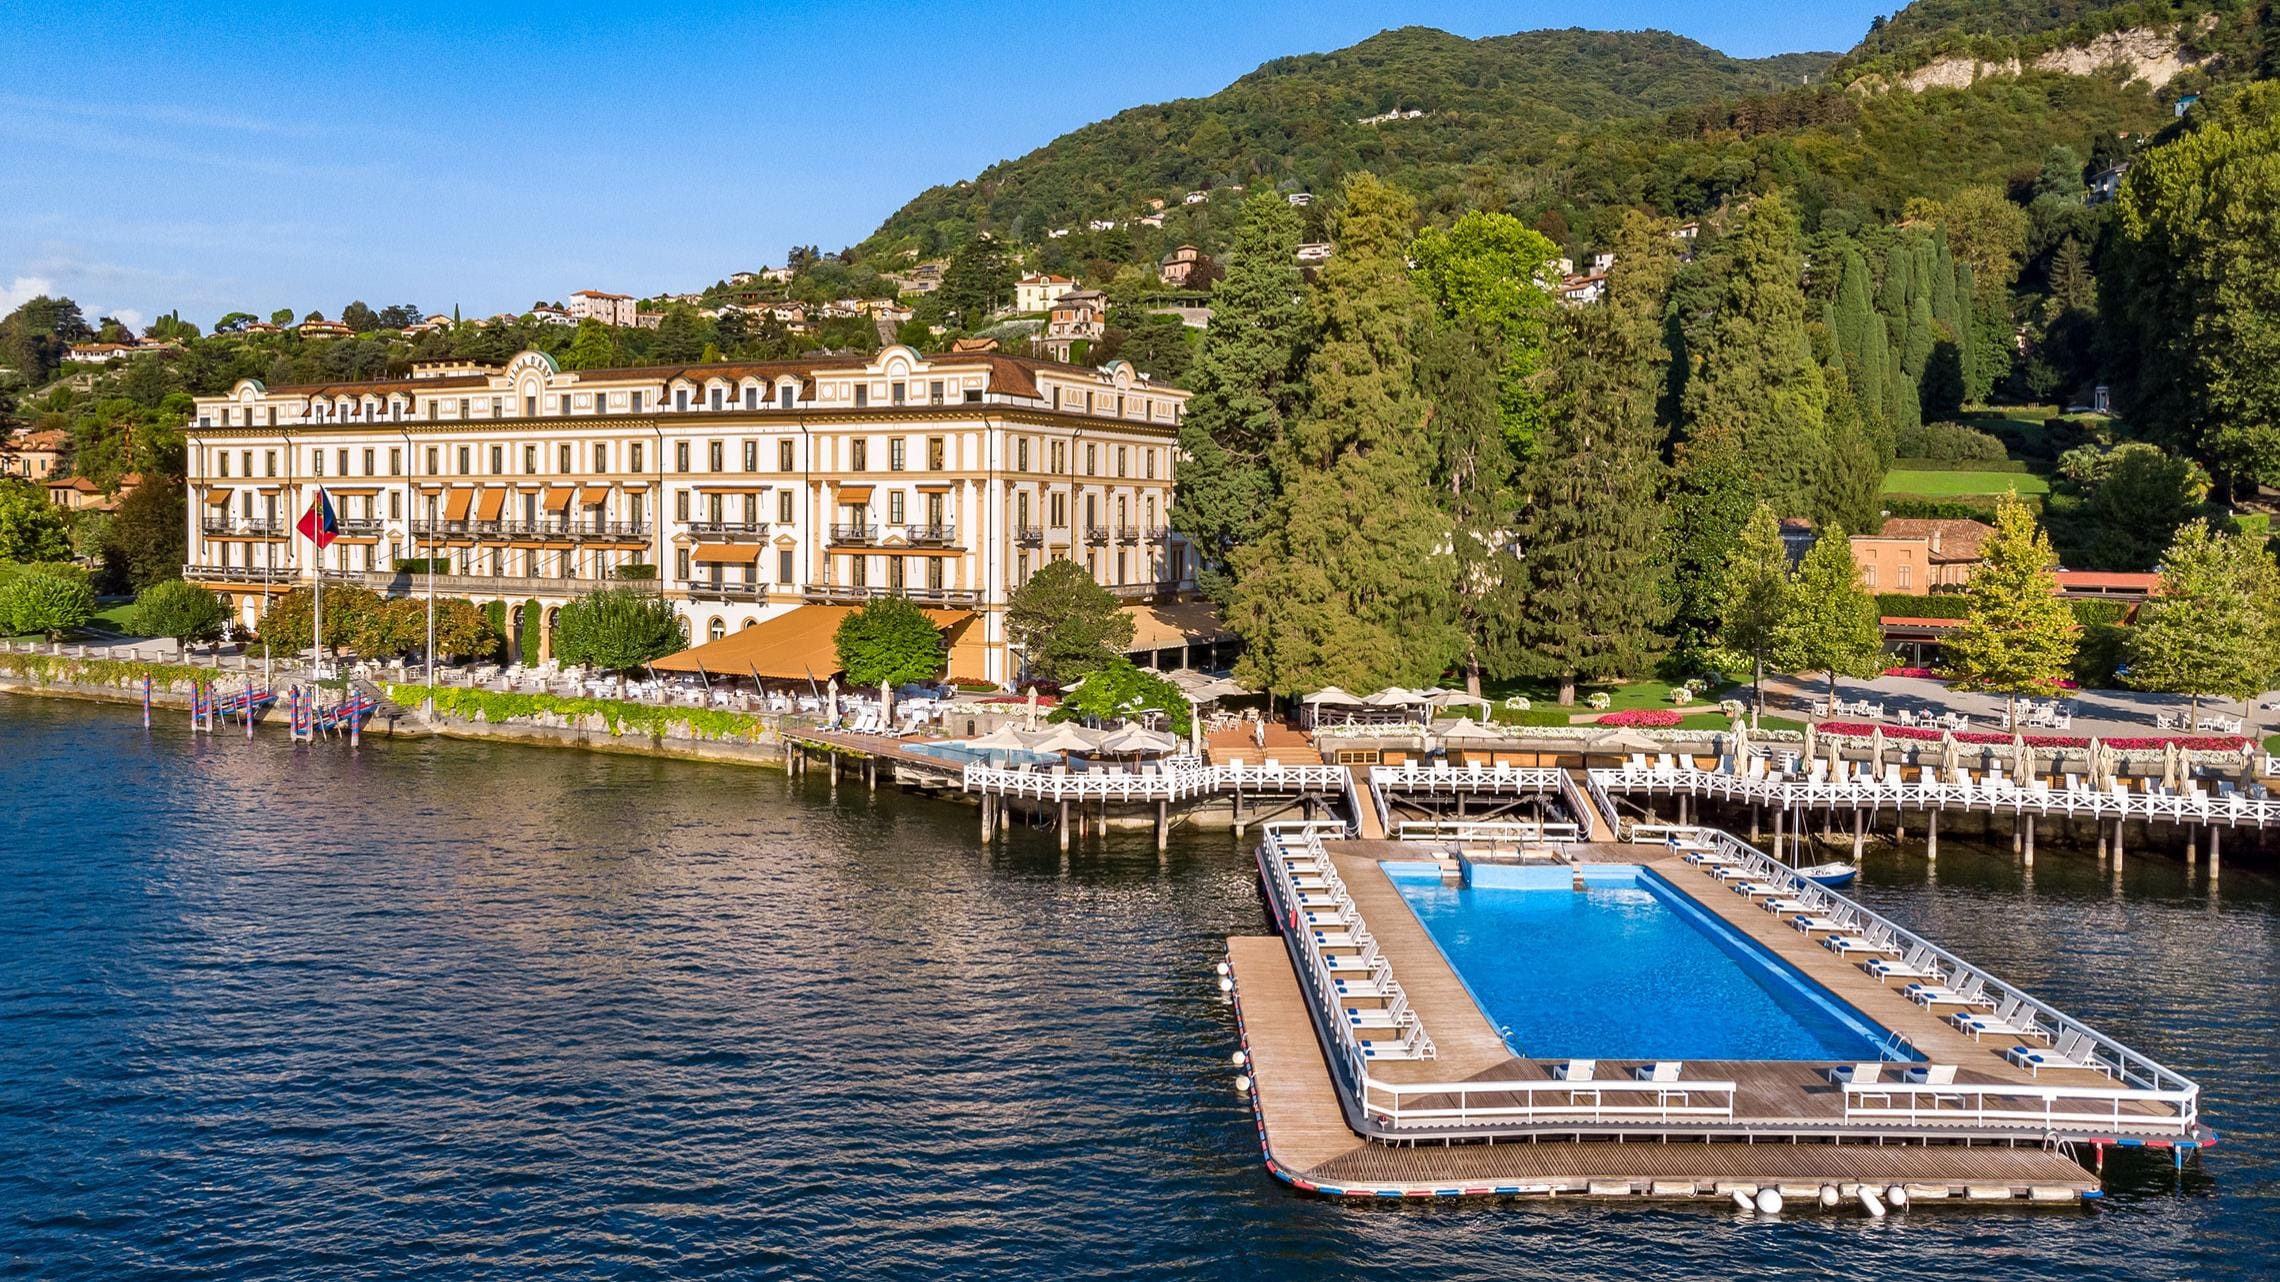 Villa d’Este 150 years of glamour on the shores of Lake Como Luxury